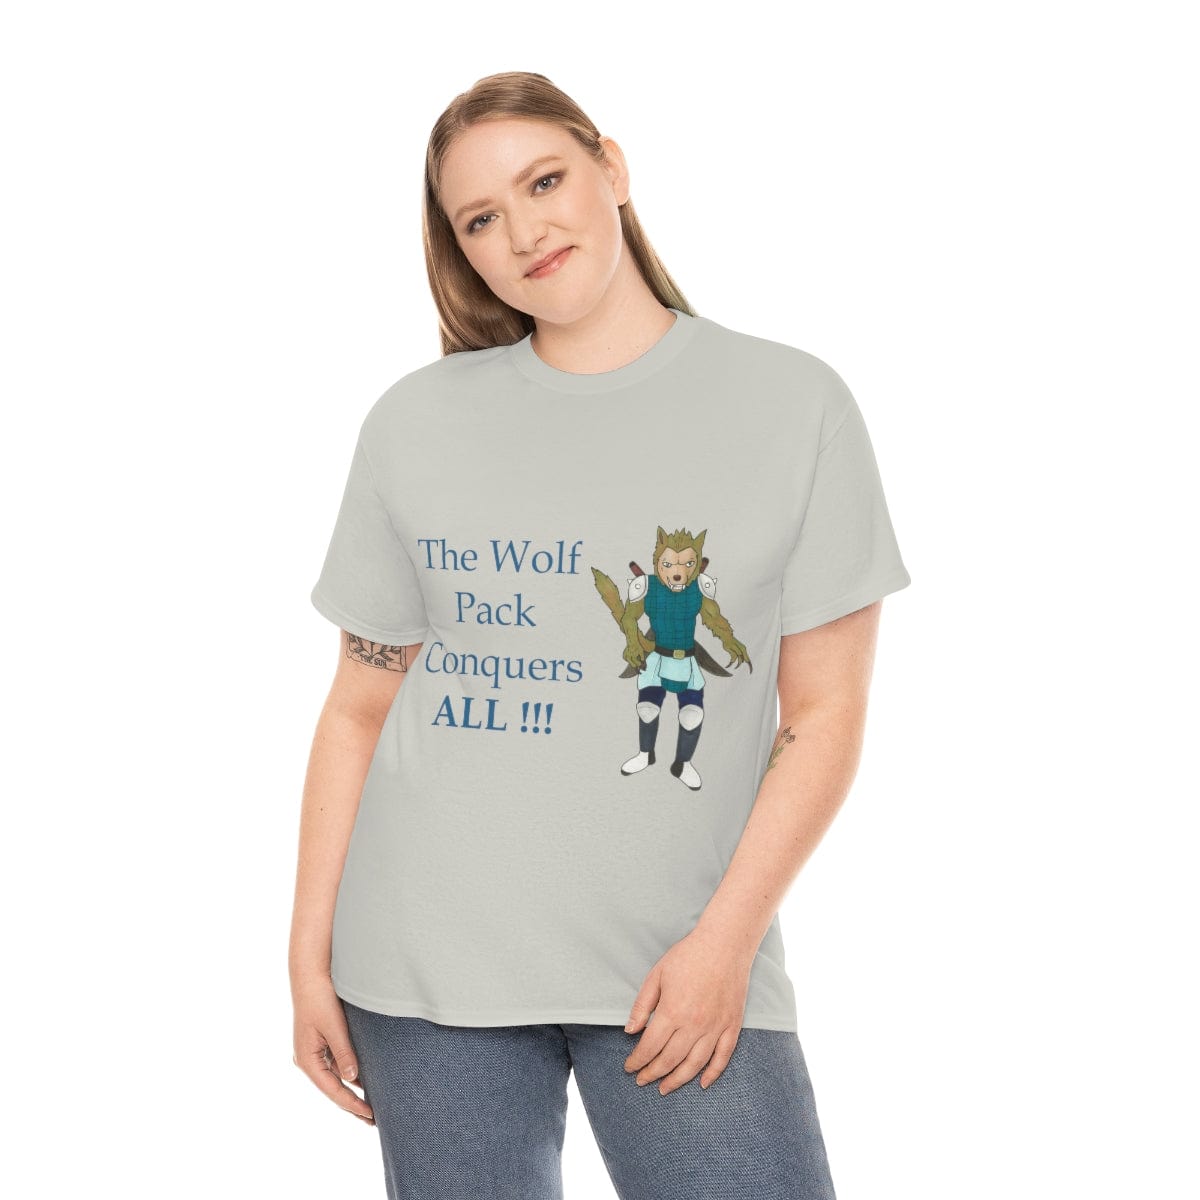 Wolf Pack Conquers All!!! T-shirt